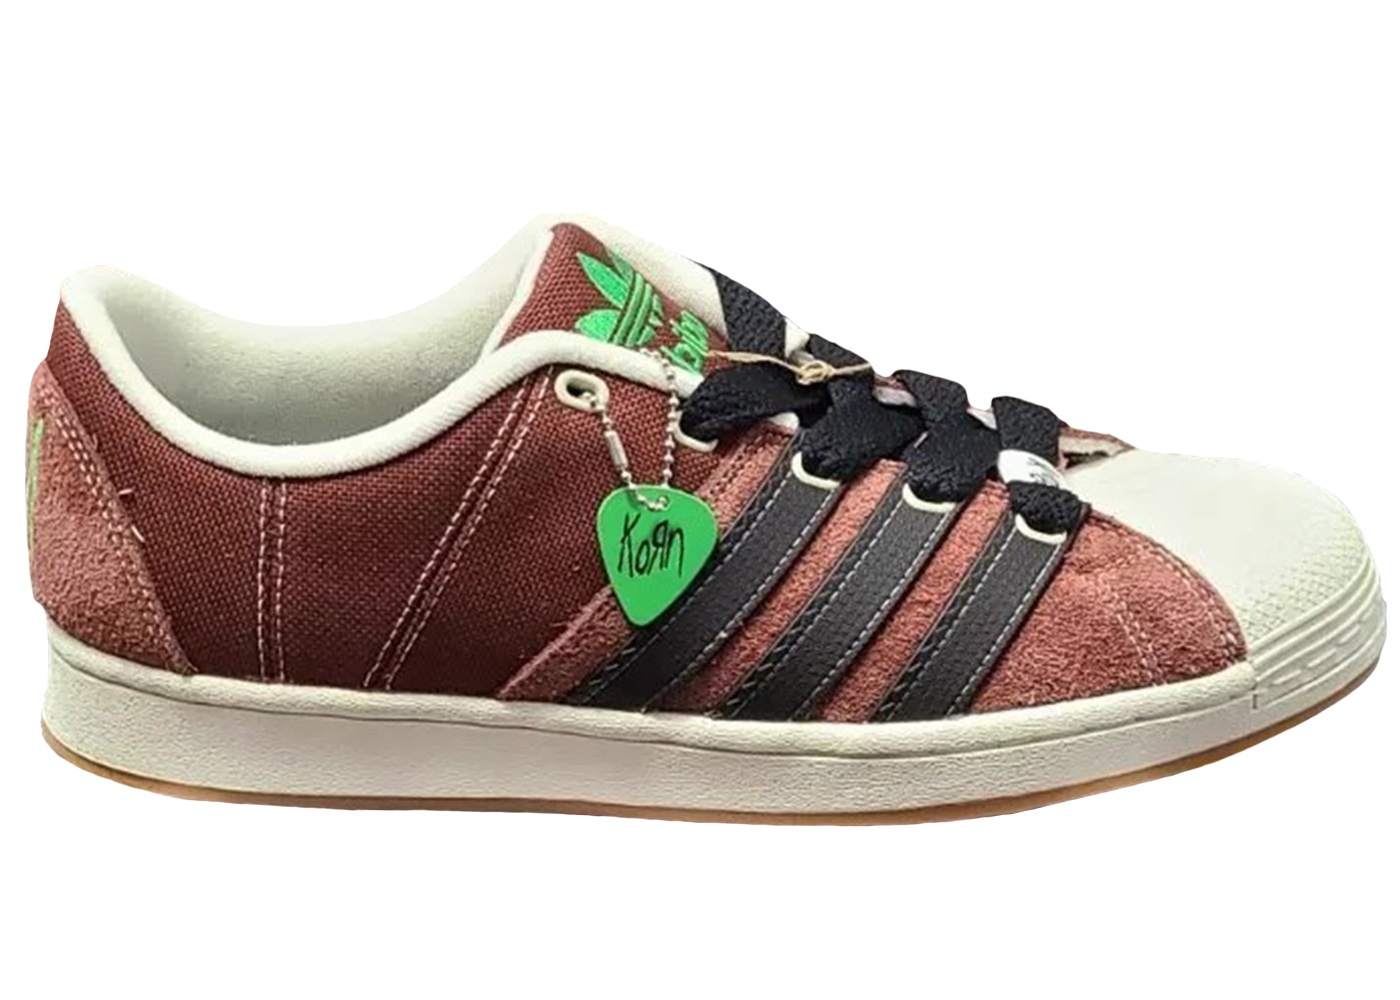 adidas Supermodified Korn Brown Men's - IF4283 - US